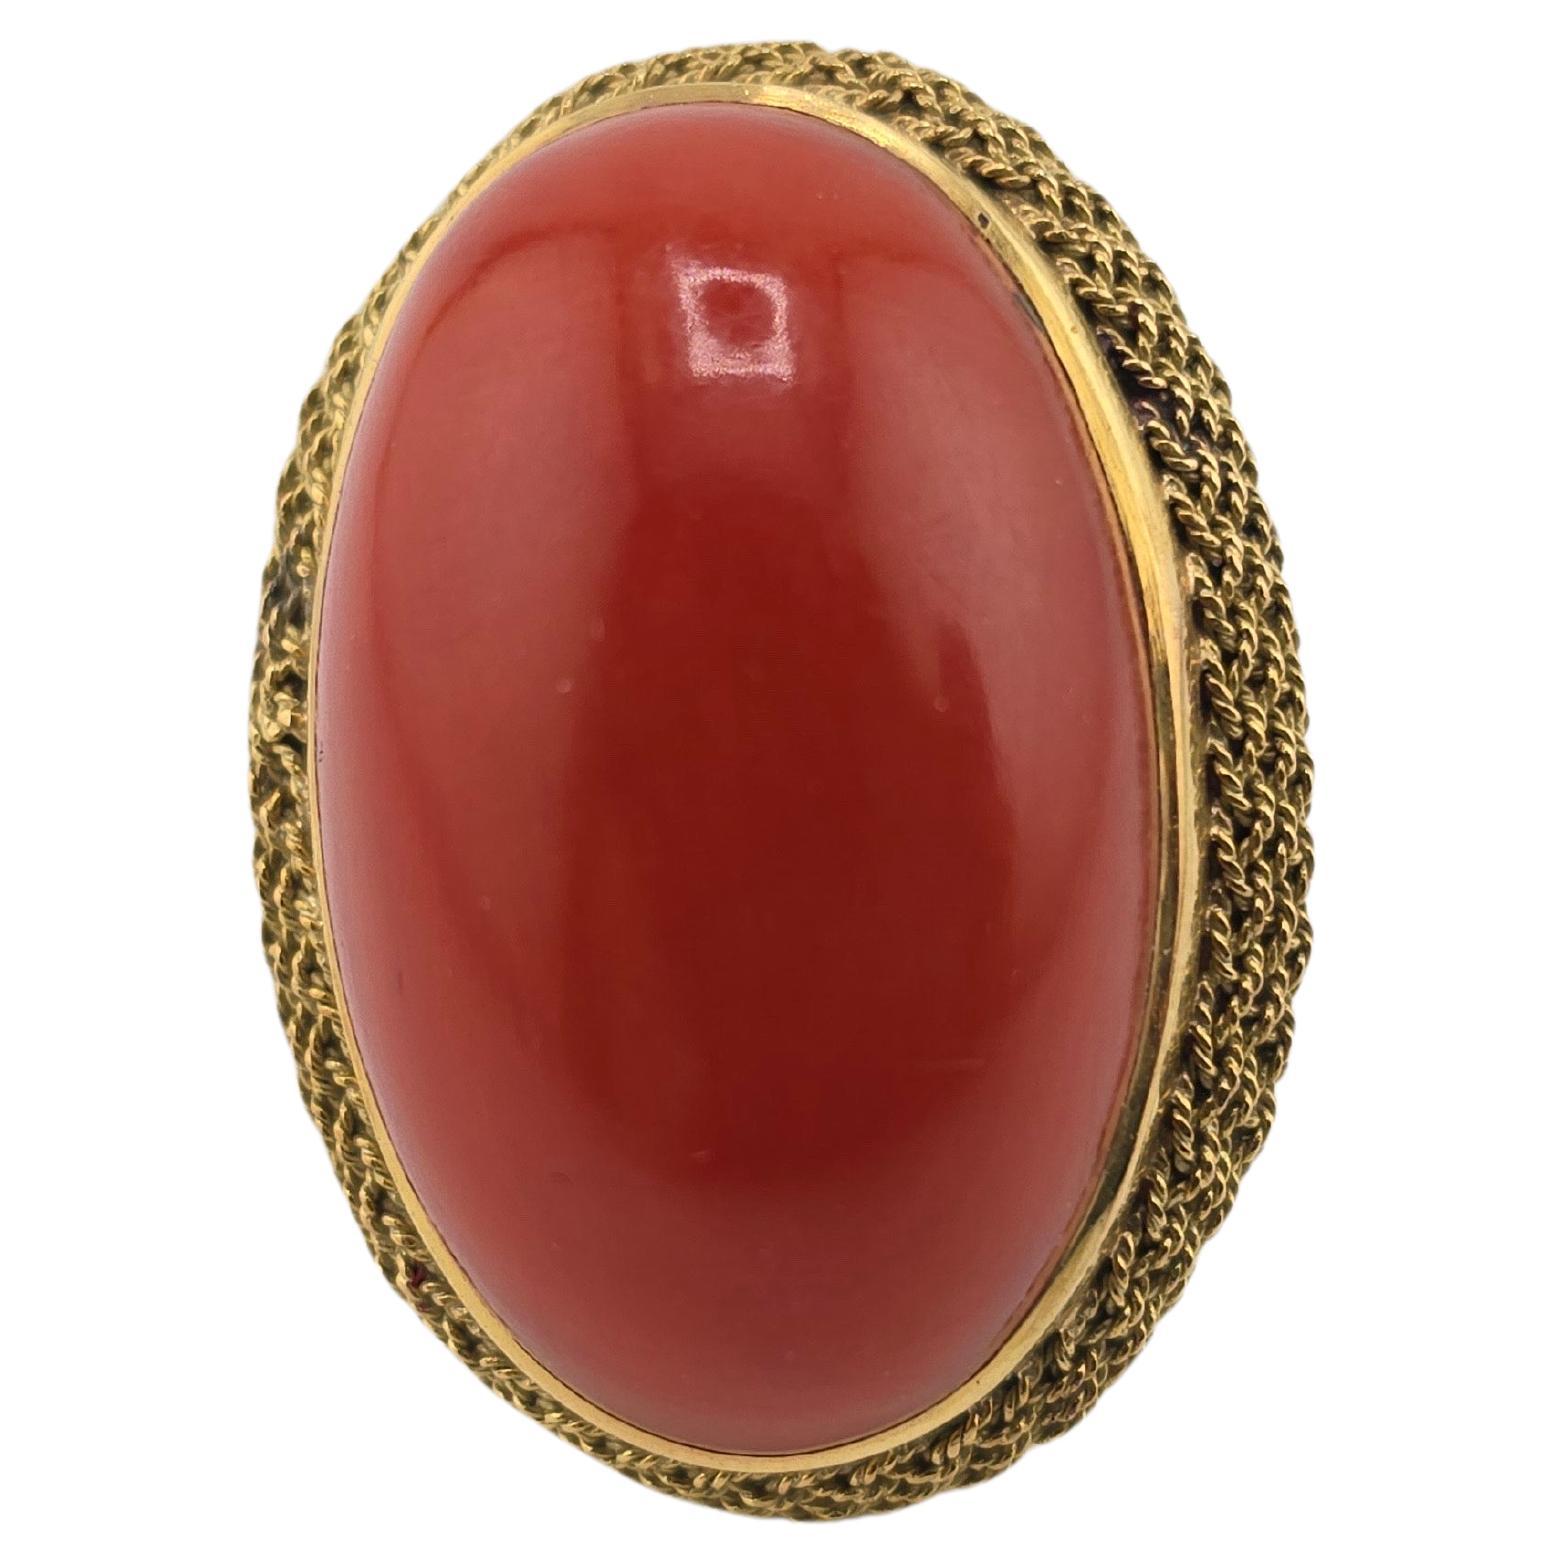 This is a massive gorgeous, deep red coral ring, made with 18 karat solid yellow gold. The redness on the coral is just indescribable and can only be seen in person to truly understand the deep redness of the color. Coral is mainly valued by the